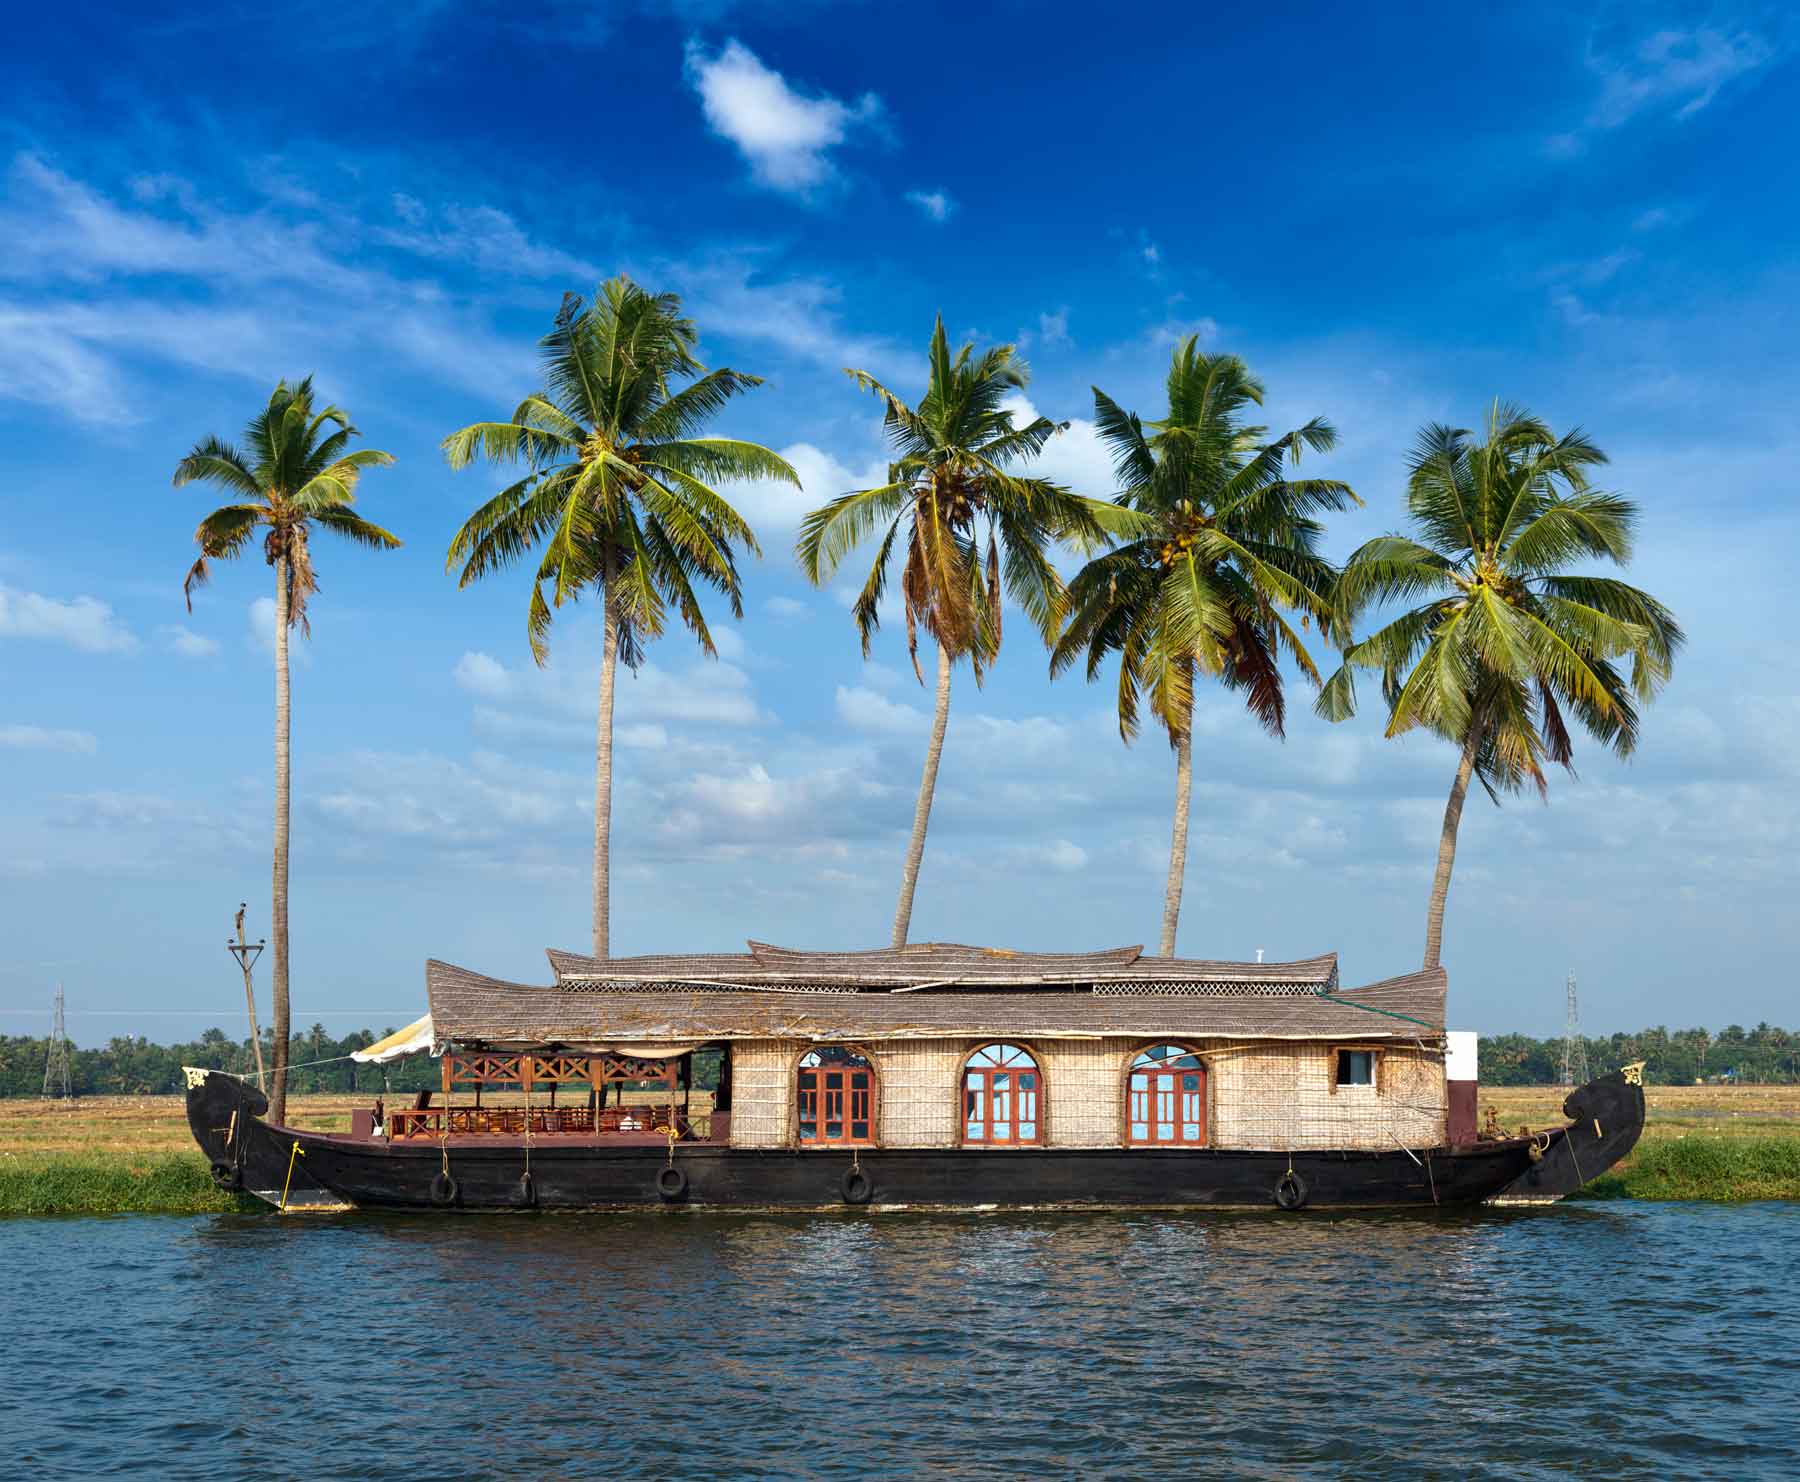 Backwaters and Houseboats in Kerala, India